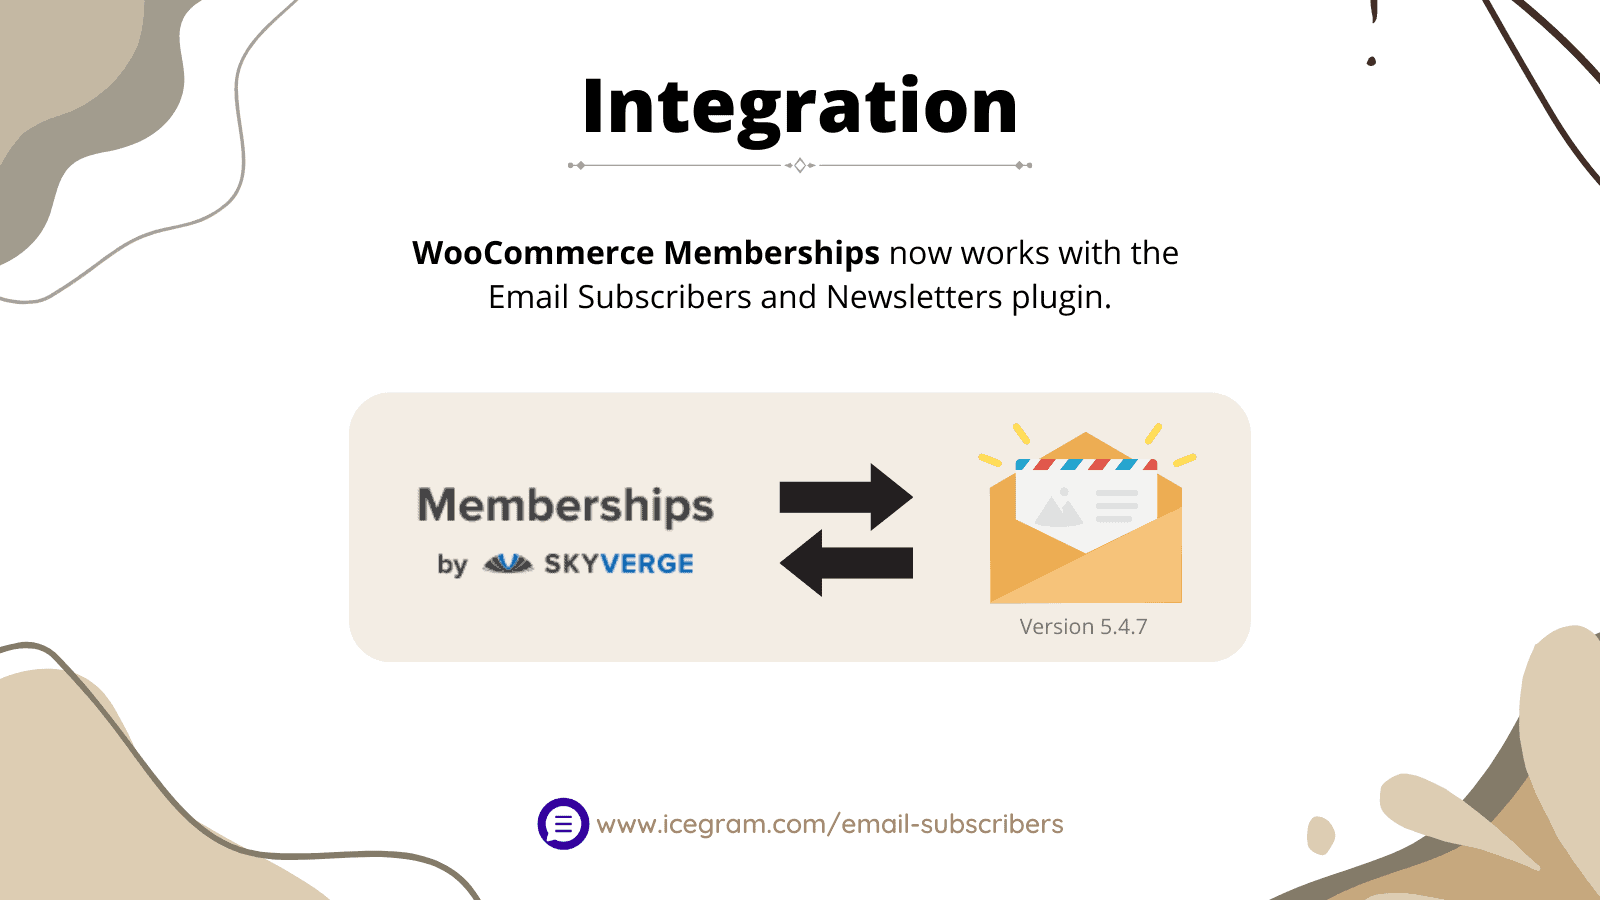 Integration - Email Subscribers and WooCommerce Memberships